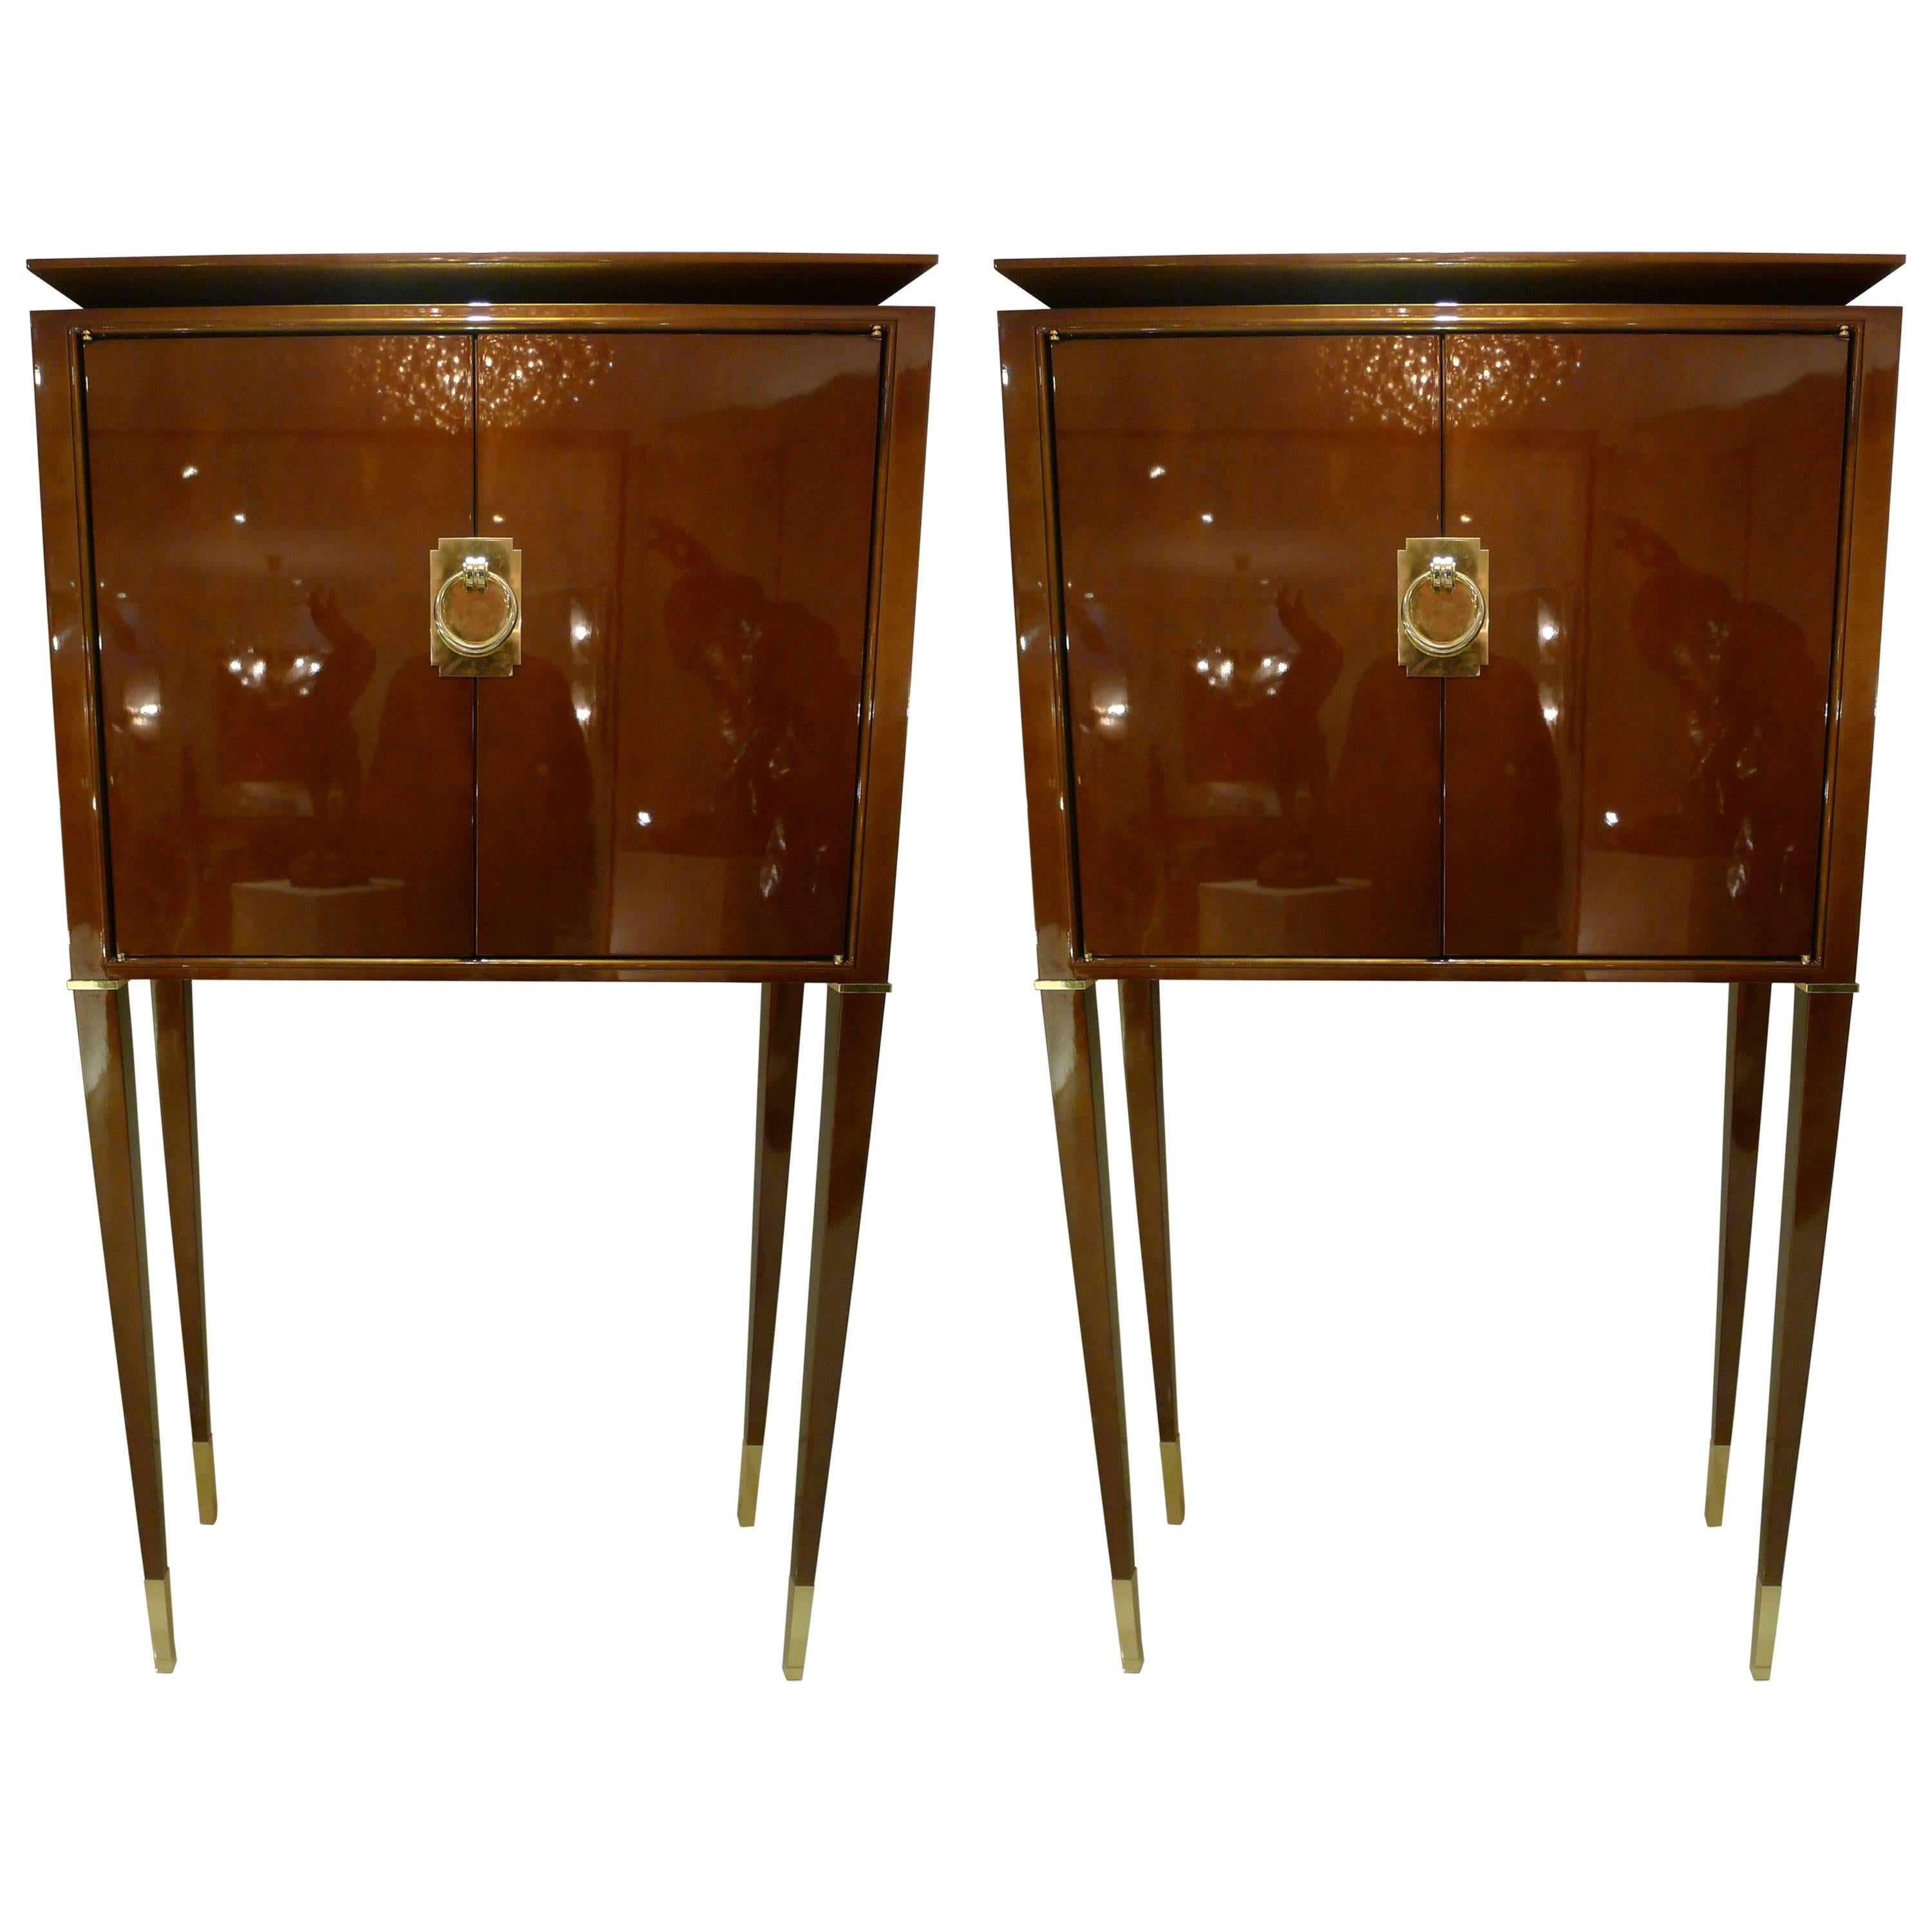 Pair of Cabinets in Style of 1940 by Frederic DAD For Sale